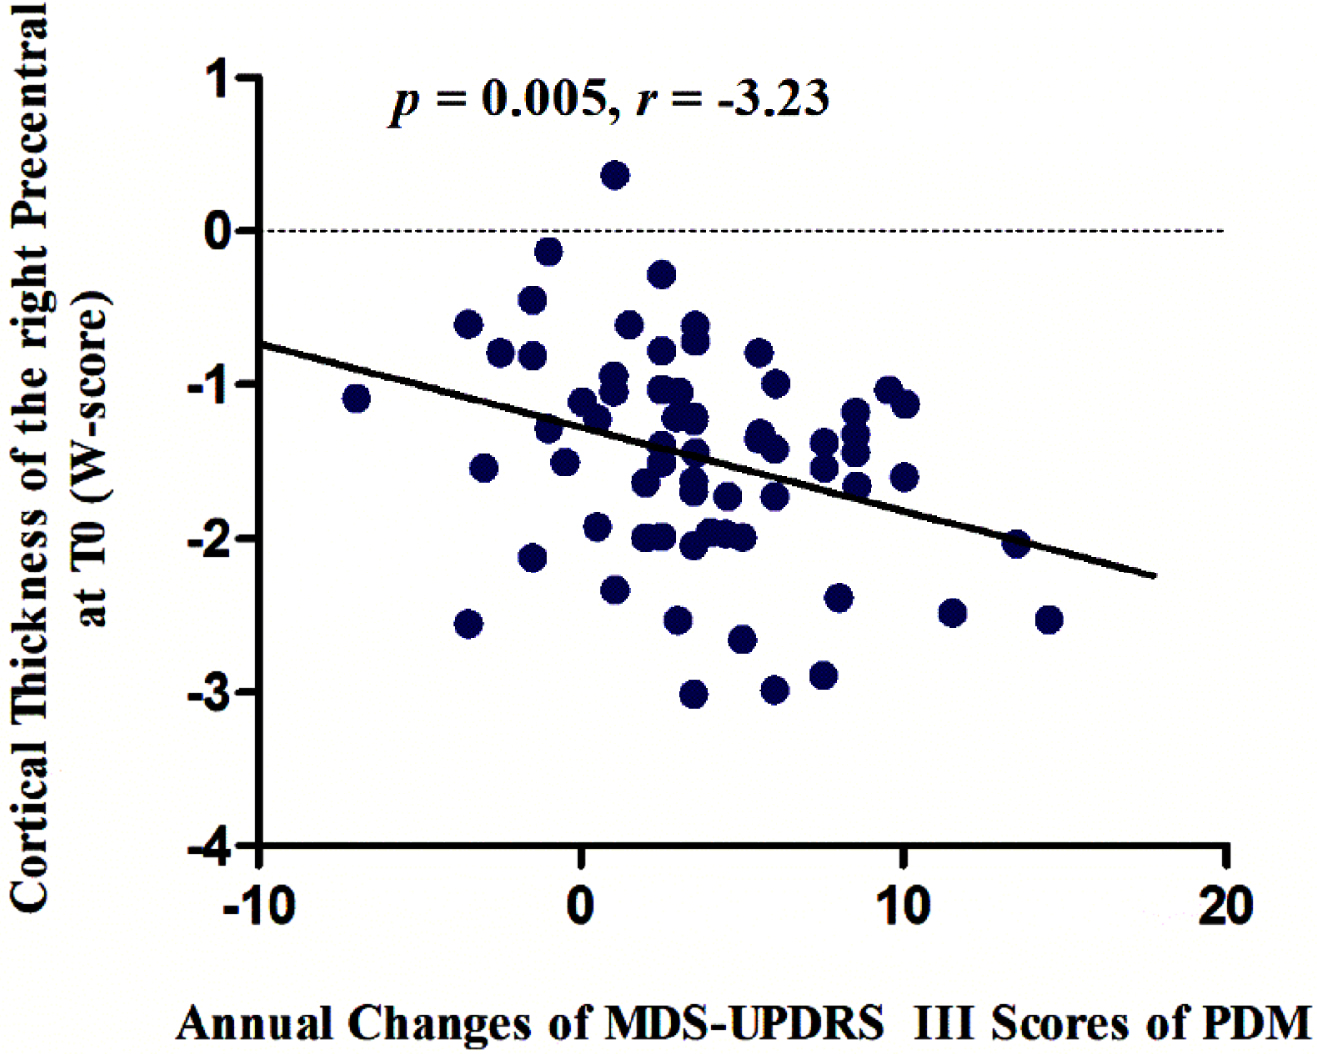 The cortical thickness of the right precentral gyrus at baseline was negatively associated with the annual changes in MDS-UPDRS Part III scores over time in male PD patients (p = 0.005, r = –3.23). MDS-UPDRS, Movement Disorder Society-Unified Parkinson’s Disease Rating Scale; PDM, male PD patients.